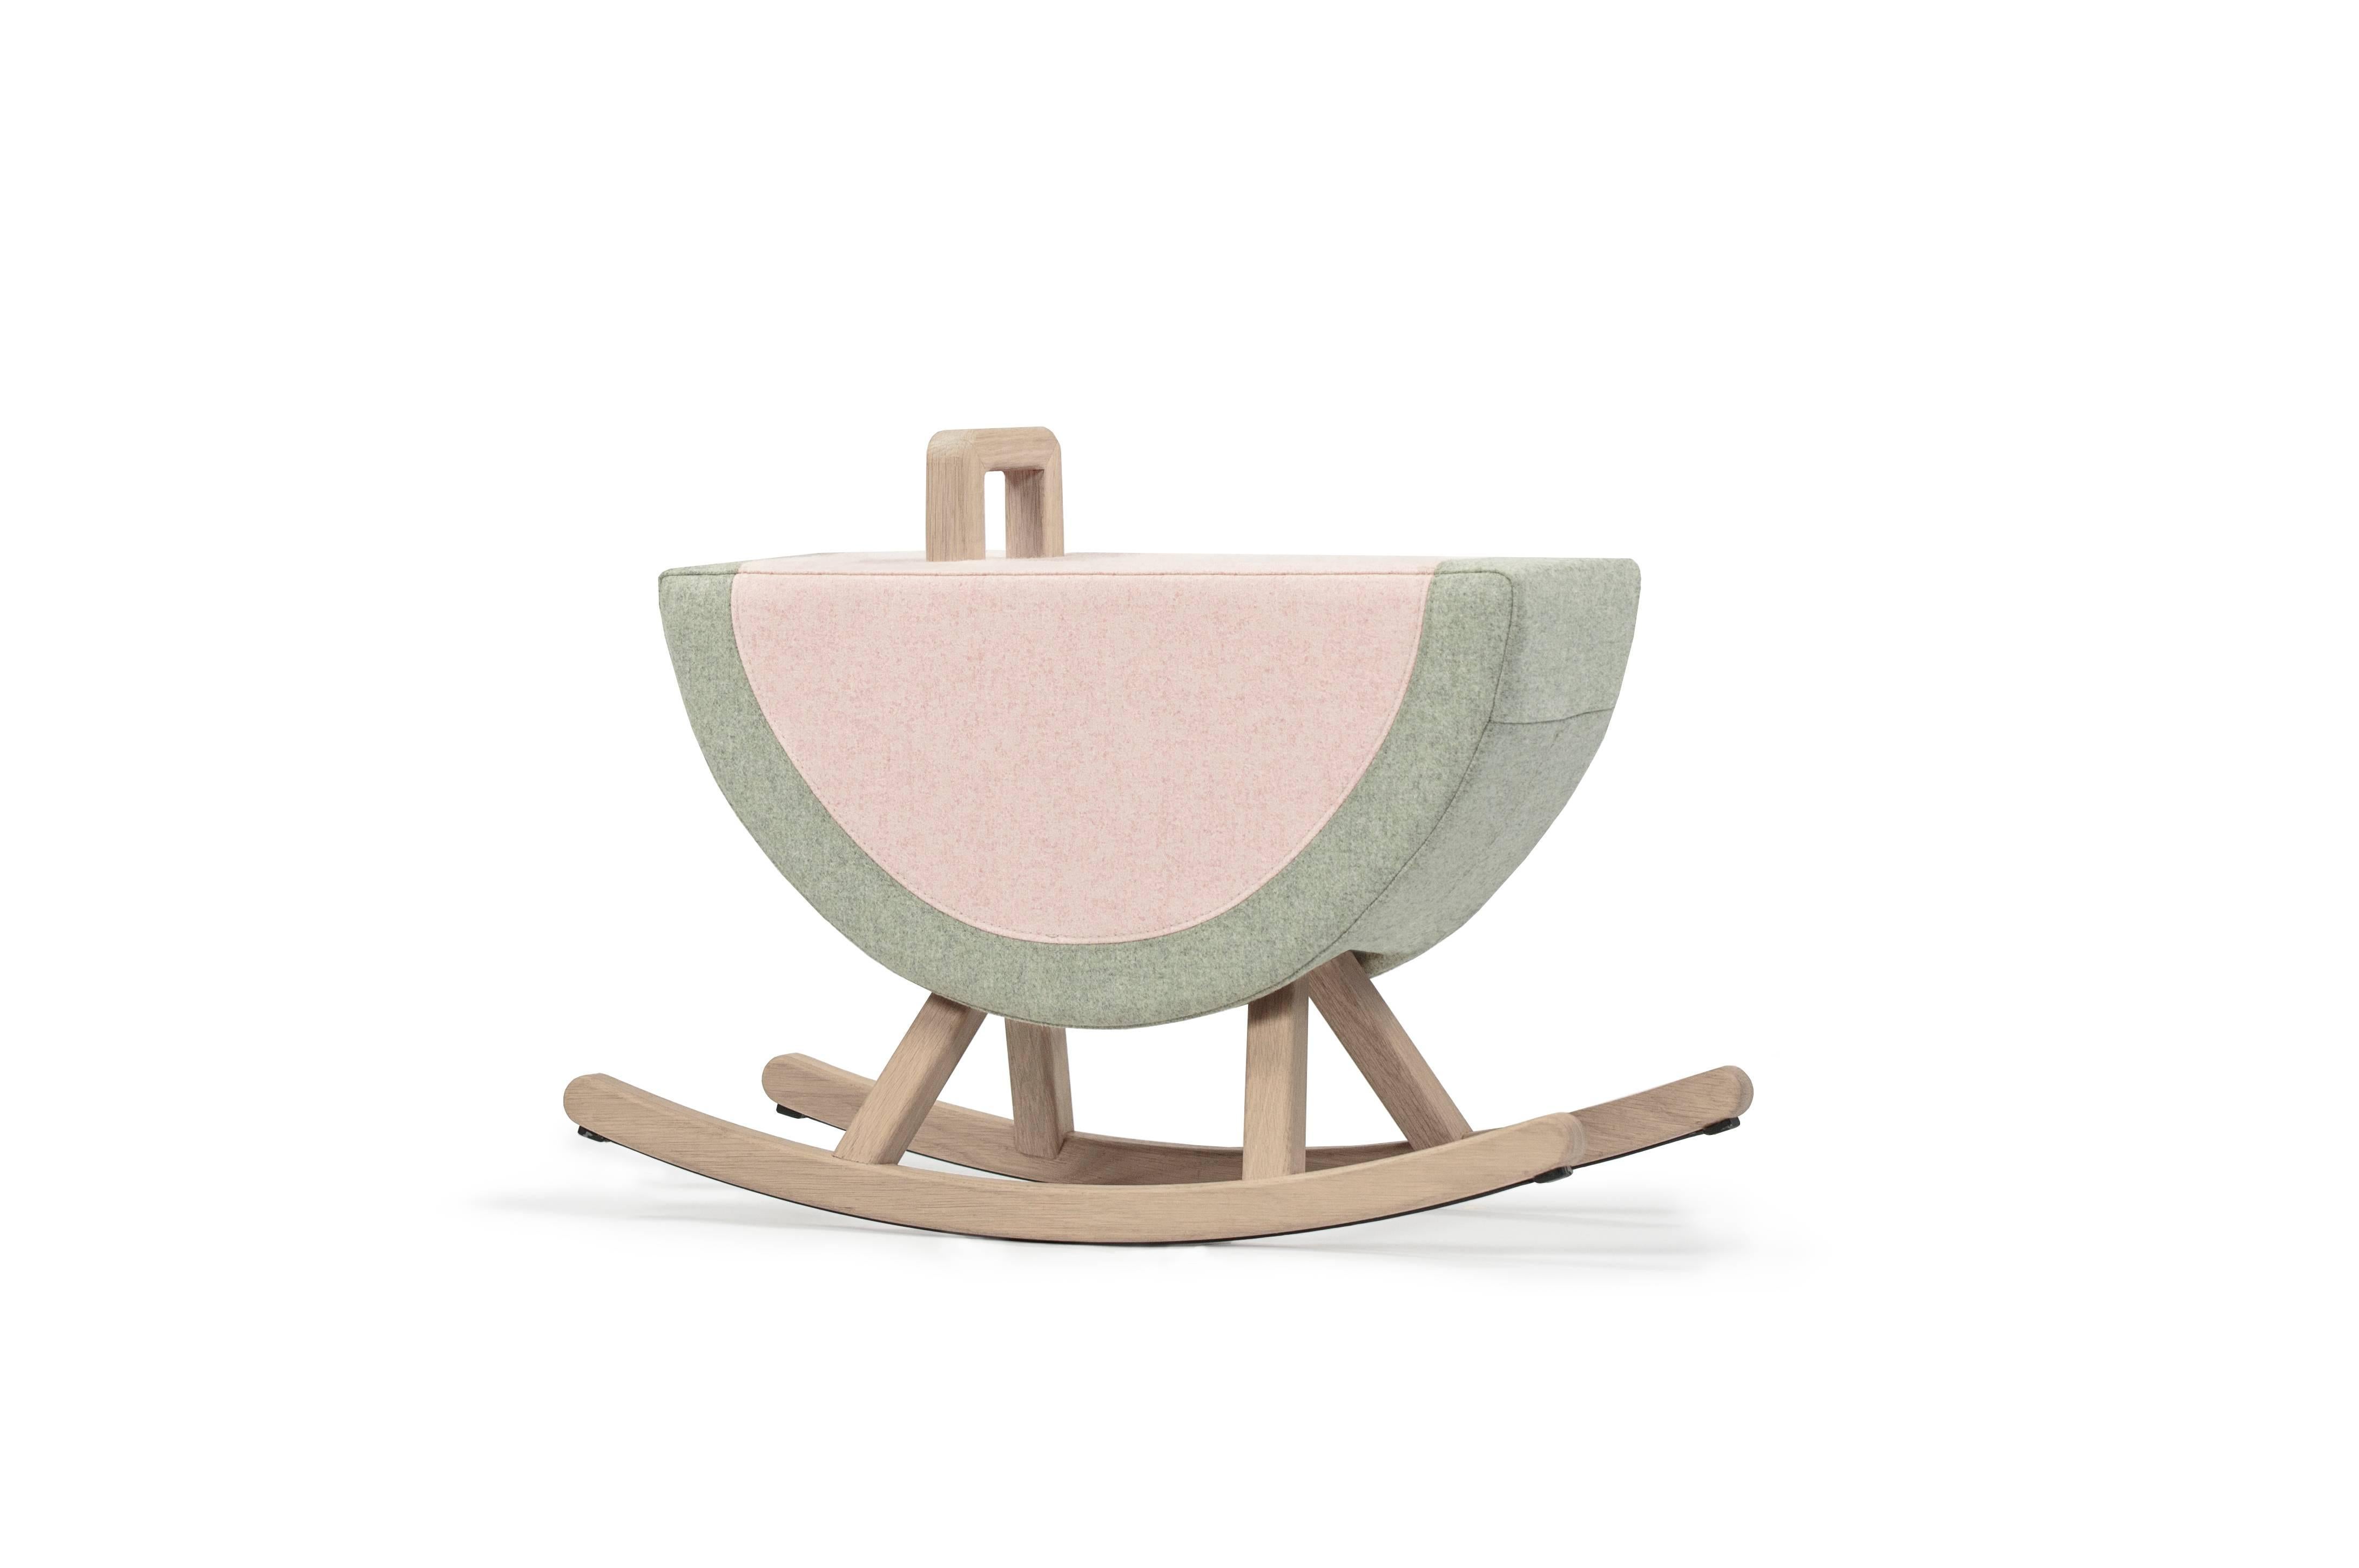 Iconic watermelon child rocker by Maison Deux

Maison Deux
Contemporary, Netherlands, 2016
French oak, Kvadrat wool, rubber
Measures: L 27 in, seat H 15.75 in, D 10.5 in.